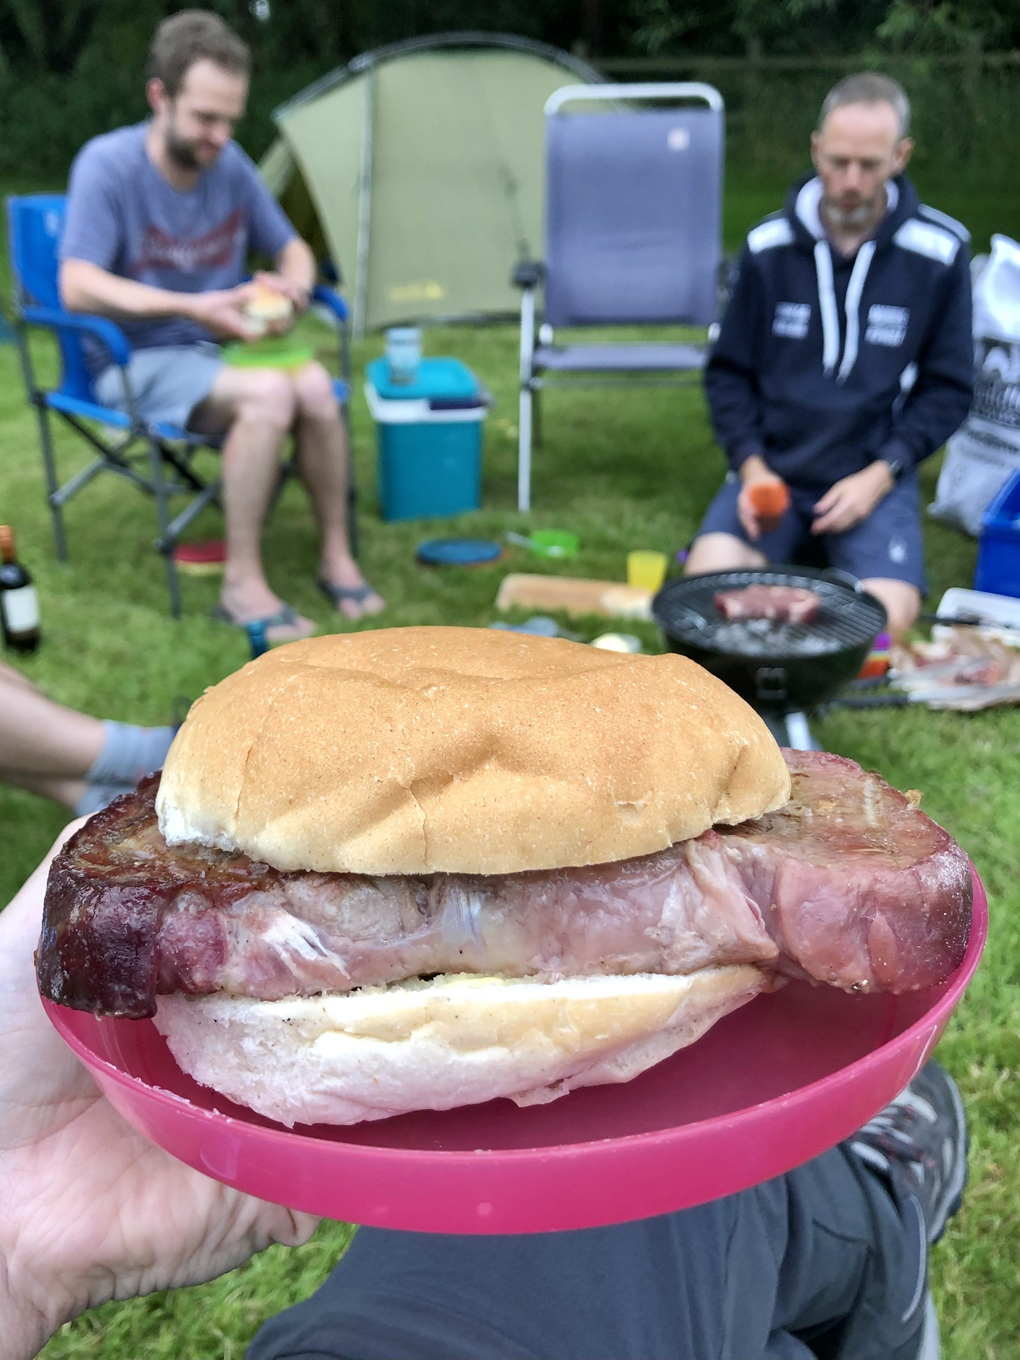 A very large steak in a small bread roll on a pink plastic plate being held in the foreground, with a tent and people camping in the background.